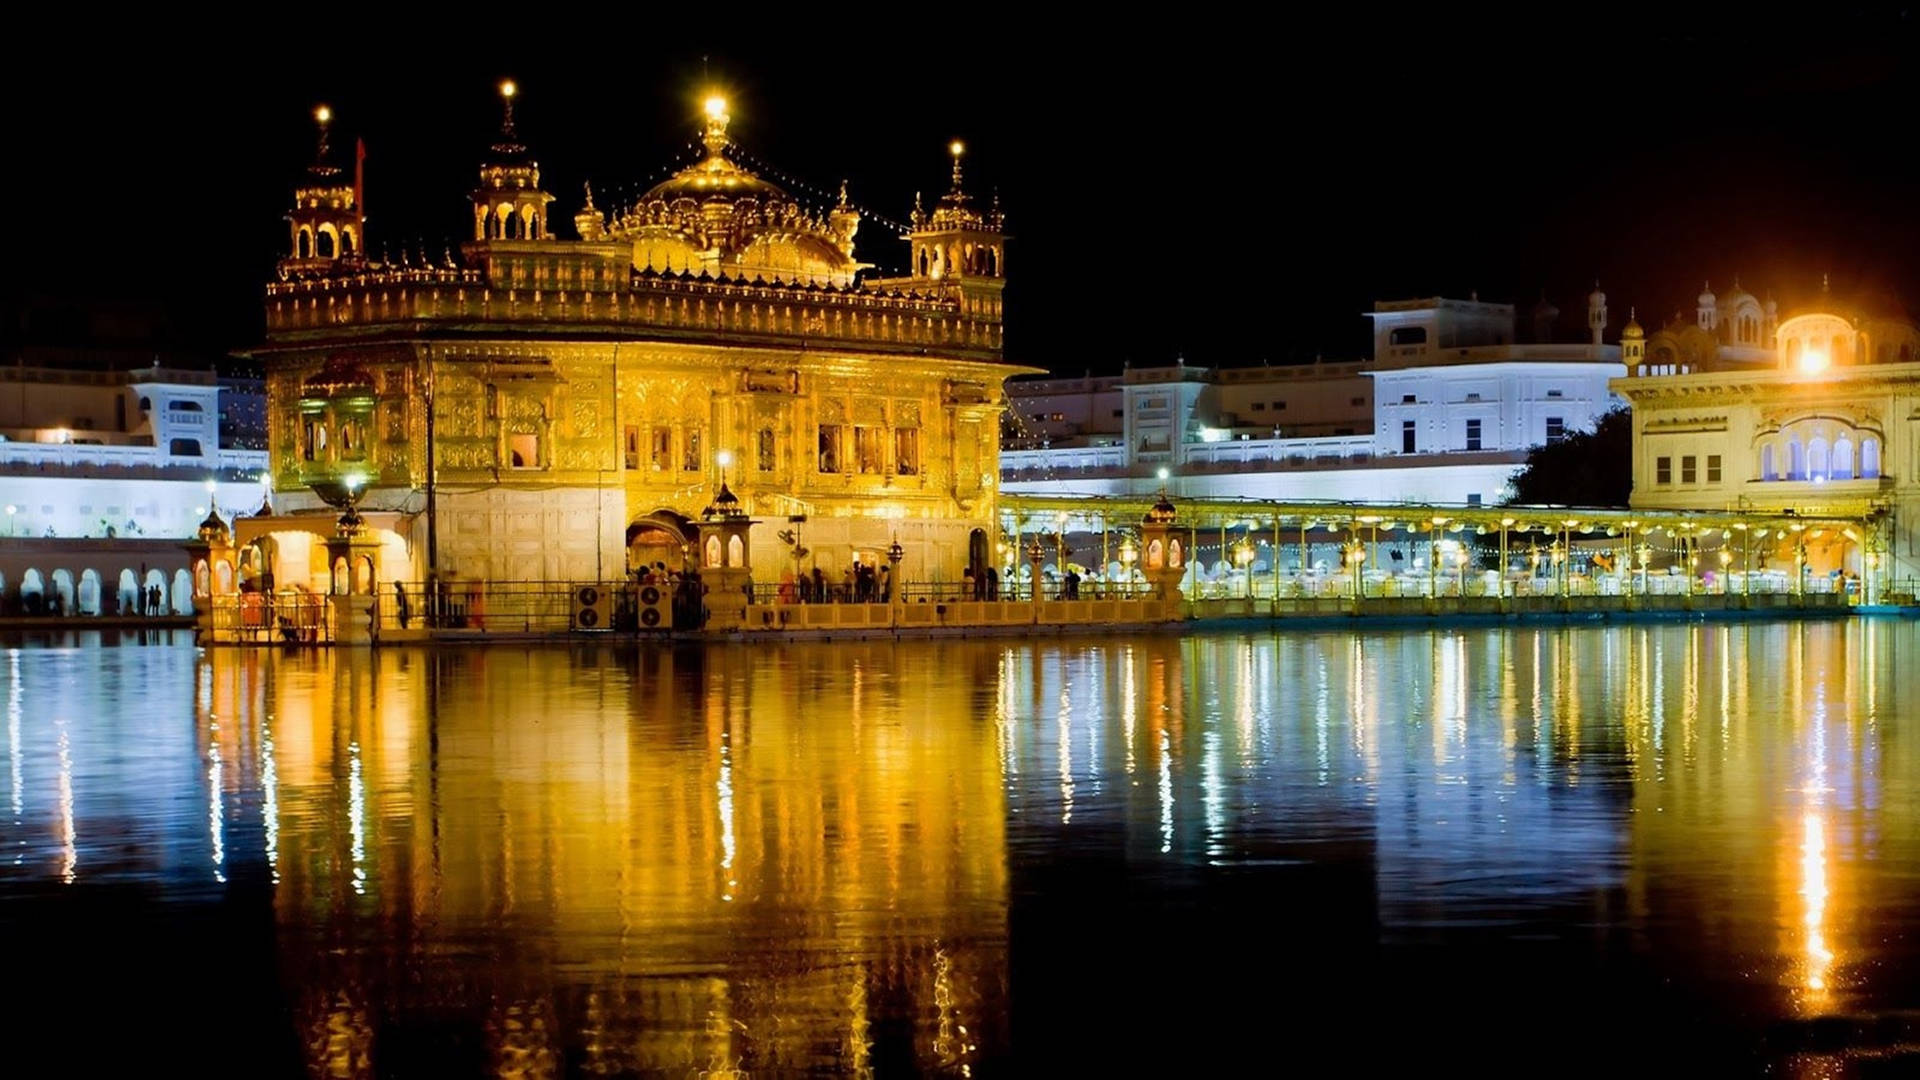 Download Blue And Yellow Lights On Golden Temple Hd Wallpaper | Wallpapers .com